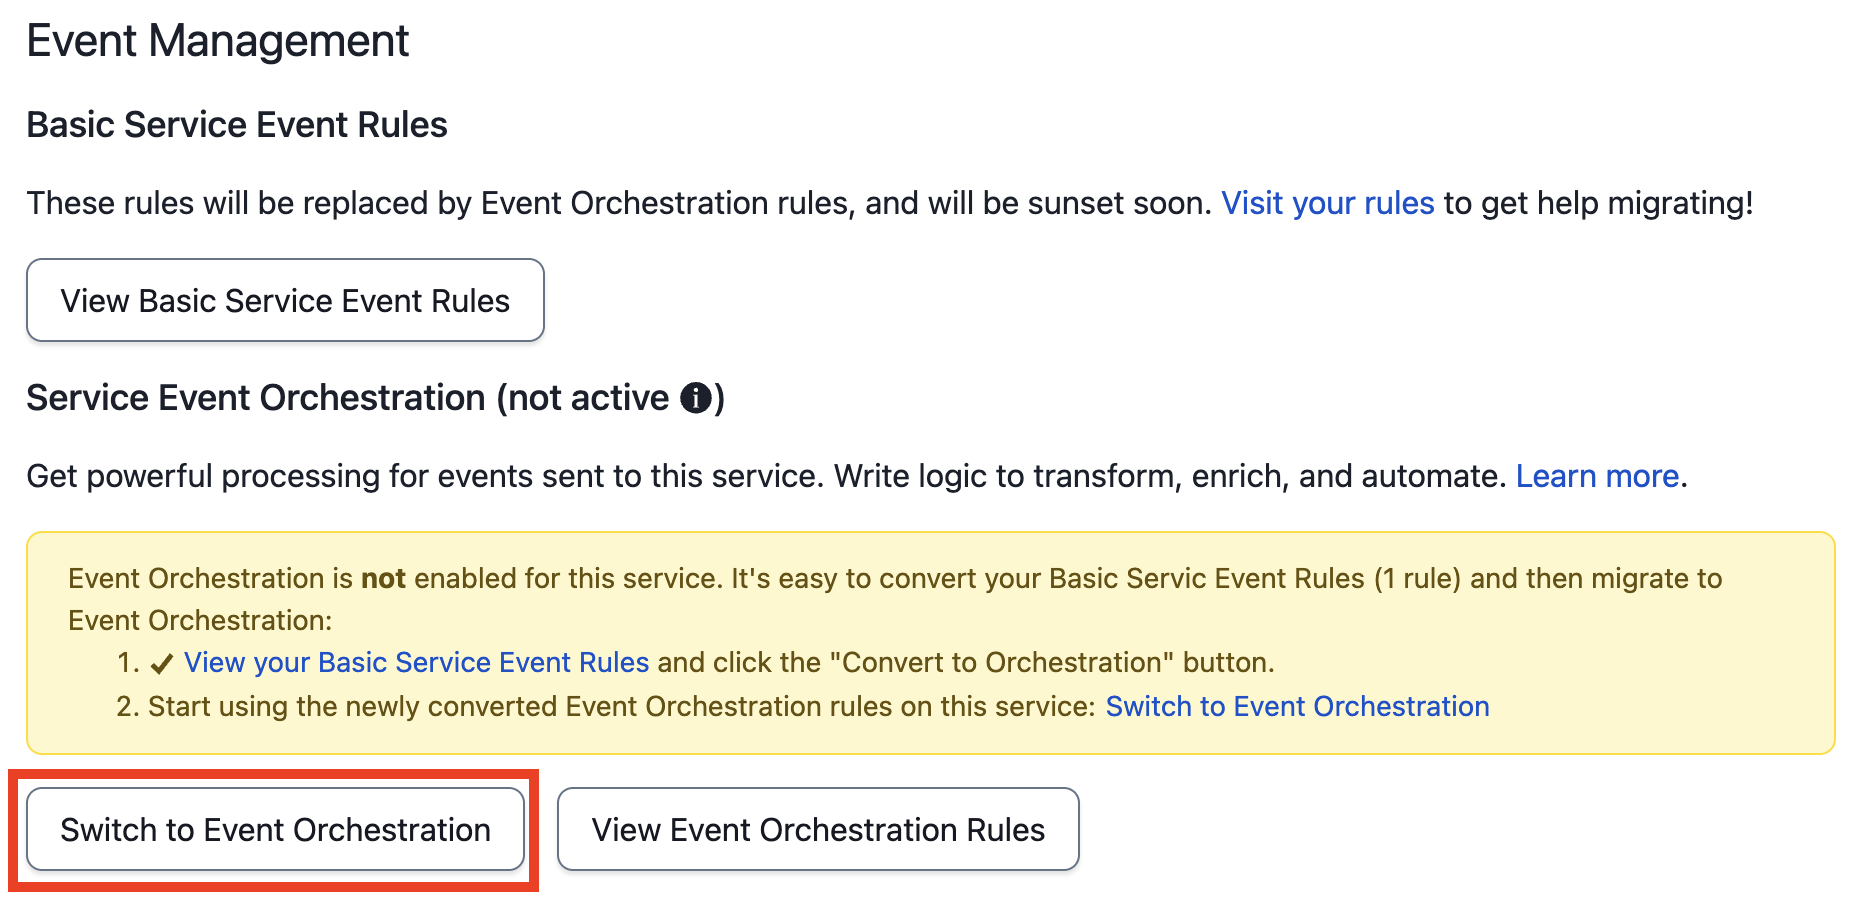 Switch to Event Orchestration button